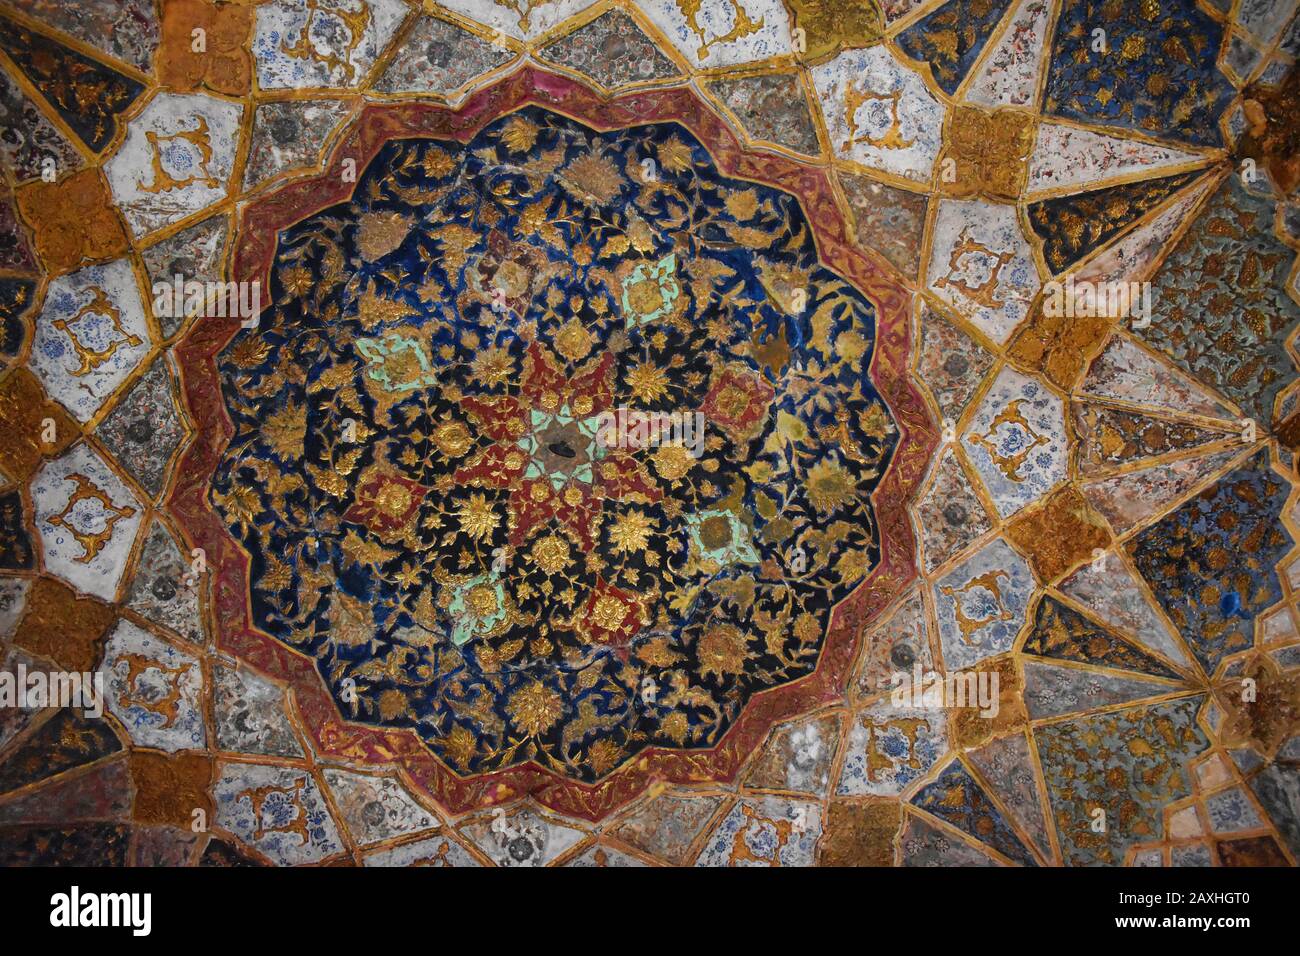 Ceiling encrusted with multi-colored stone pattern, Mausoleum of Etmaduddaula or Itmad-ud-Daula tomb often regarded as a draft of the Taj Mahal, Agra, Stock Photo